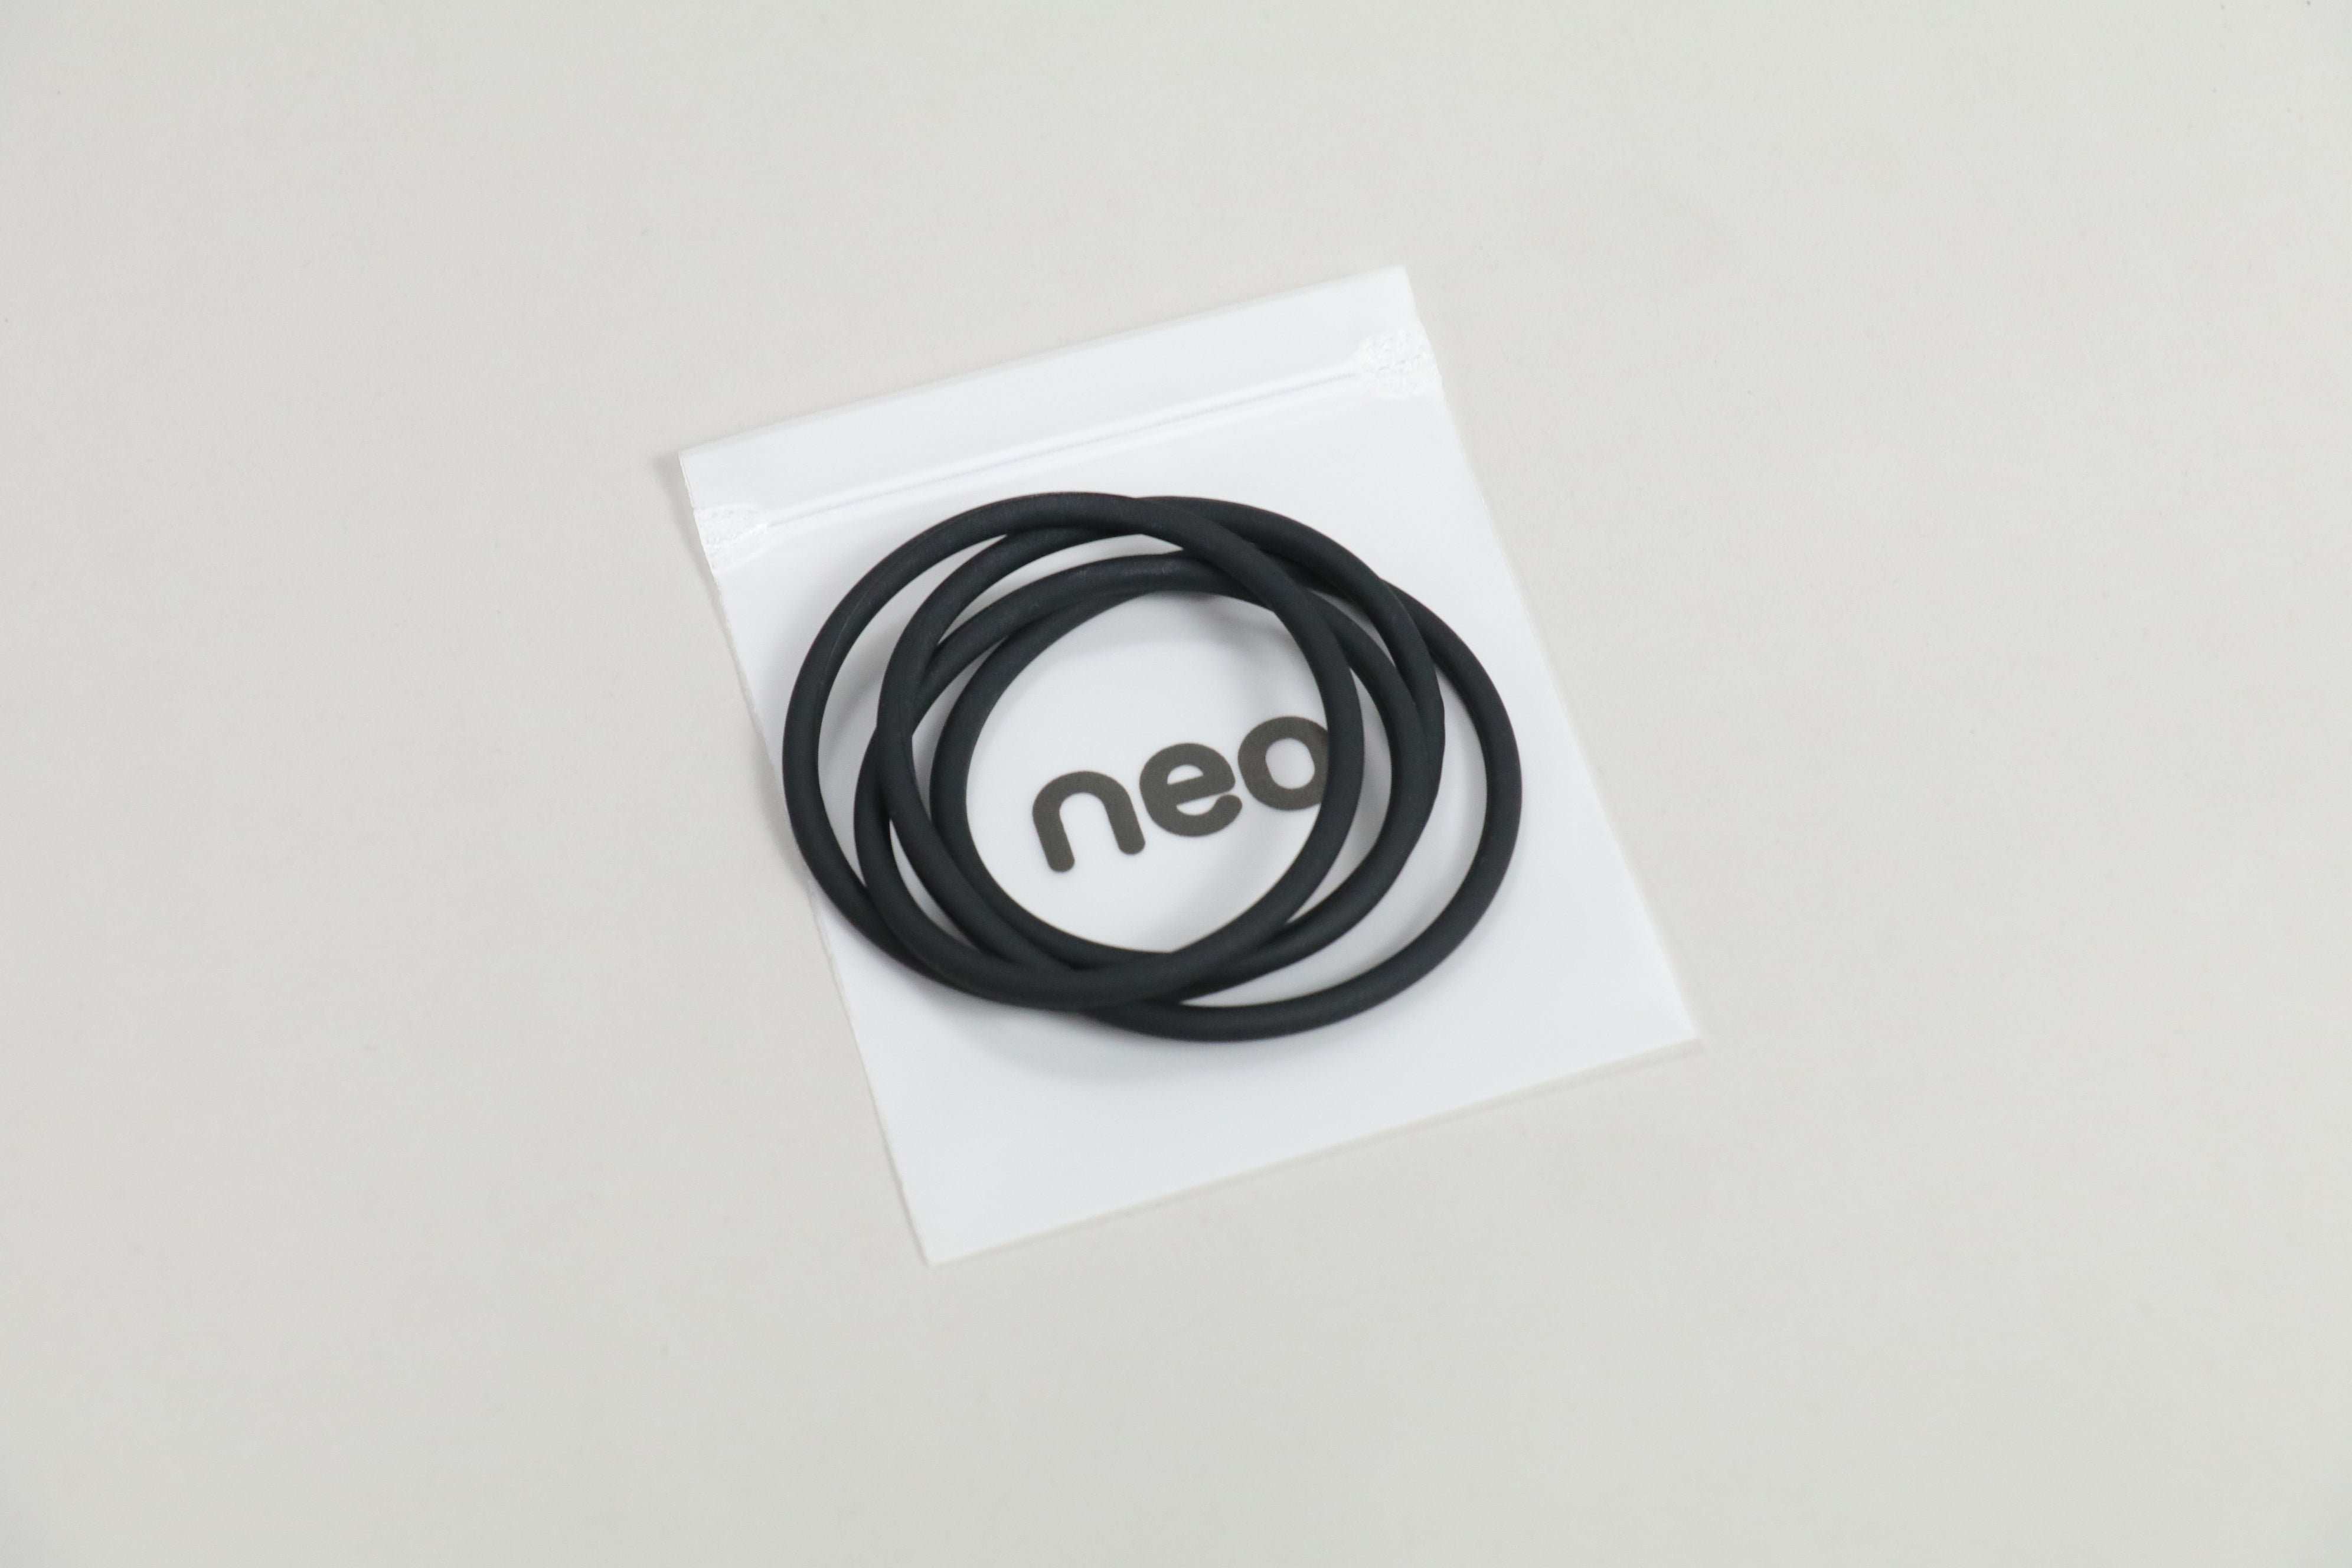 [Group Buy] Neo70 Extra Add-Ons - KeebsForAll